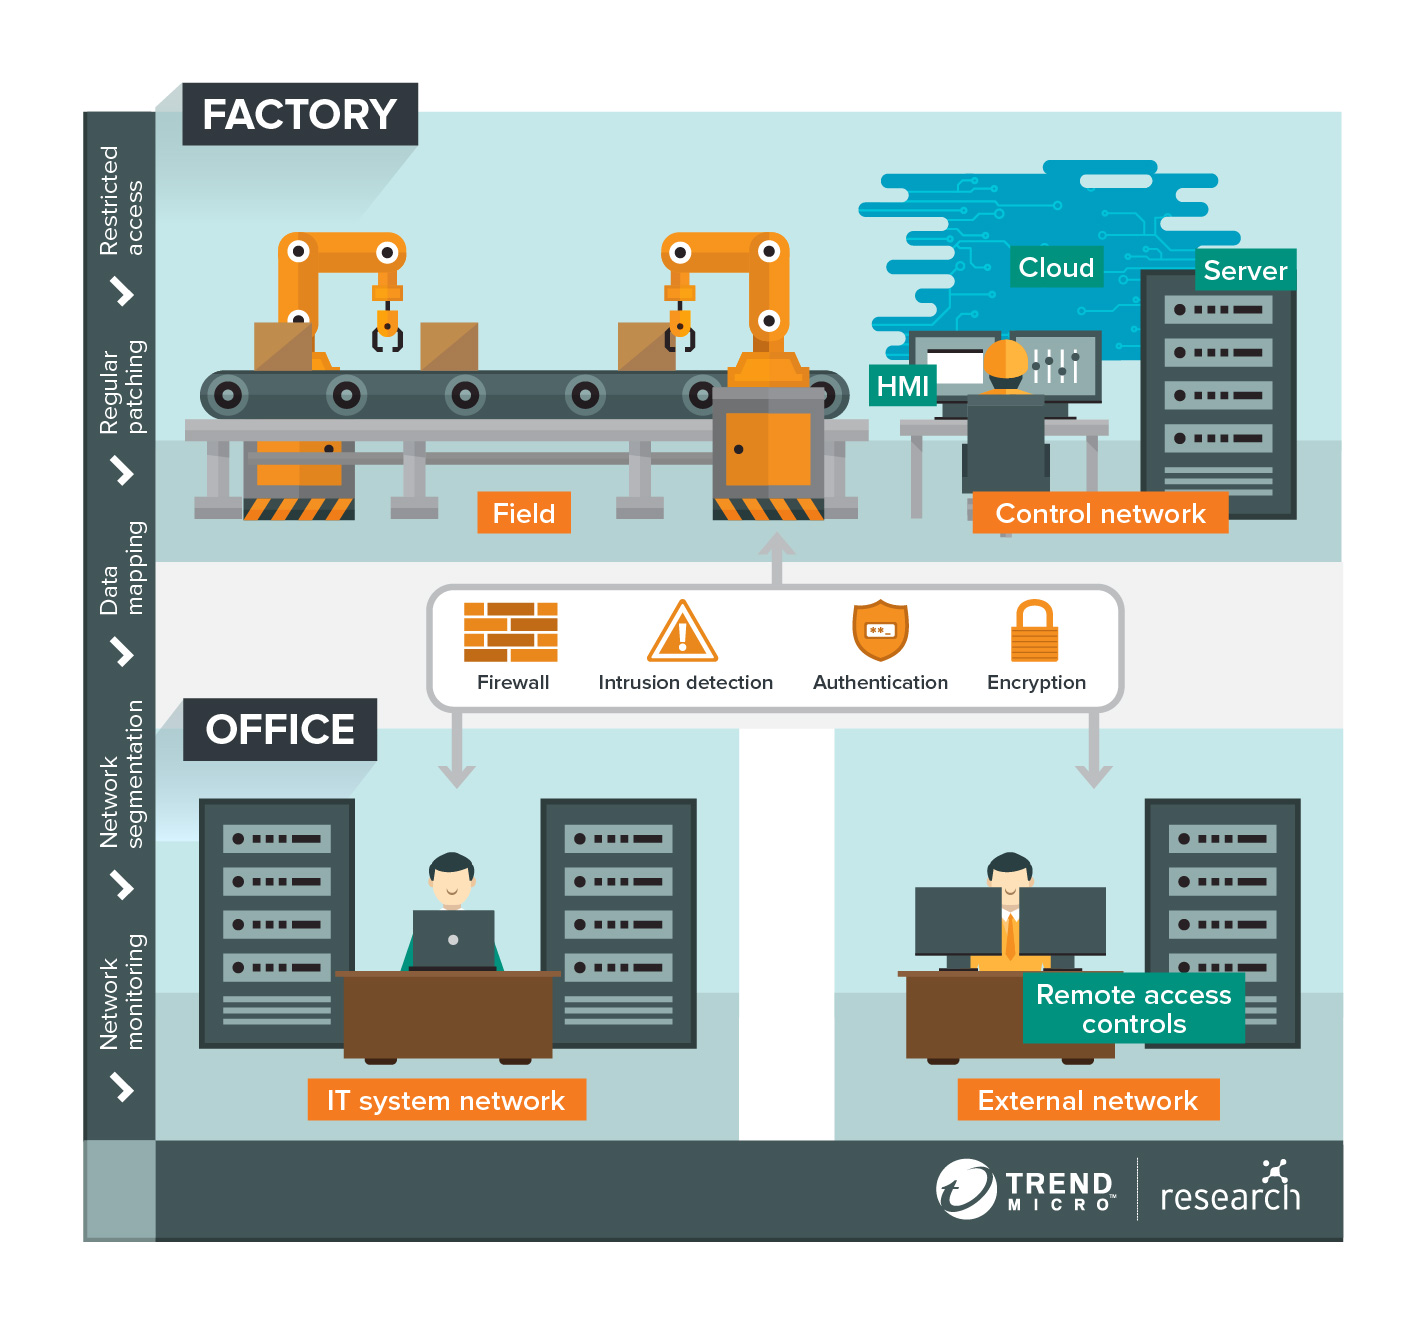 Recommended Security Architecture for Smart Factories